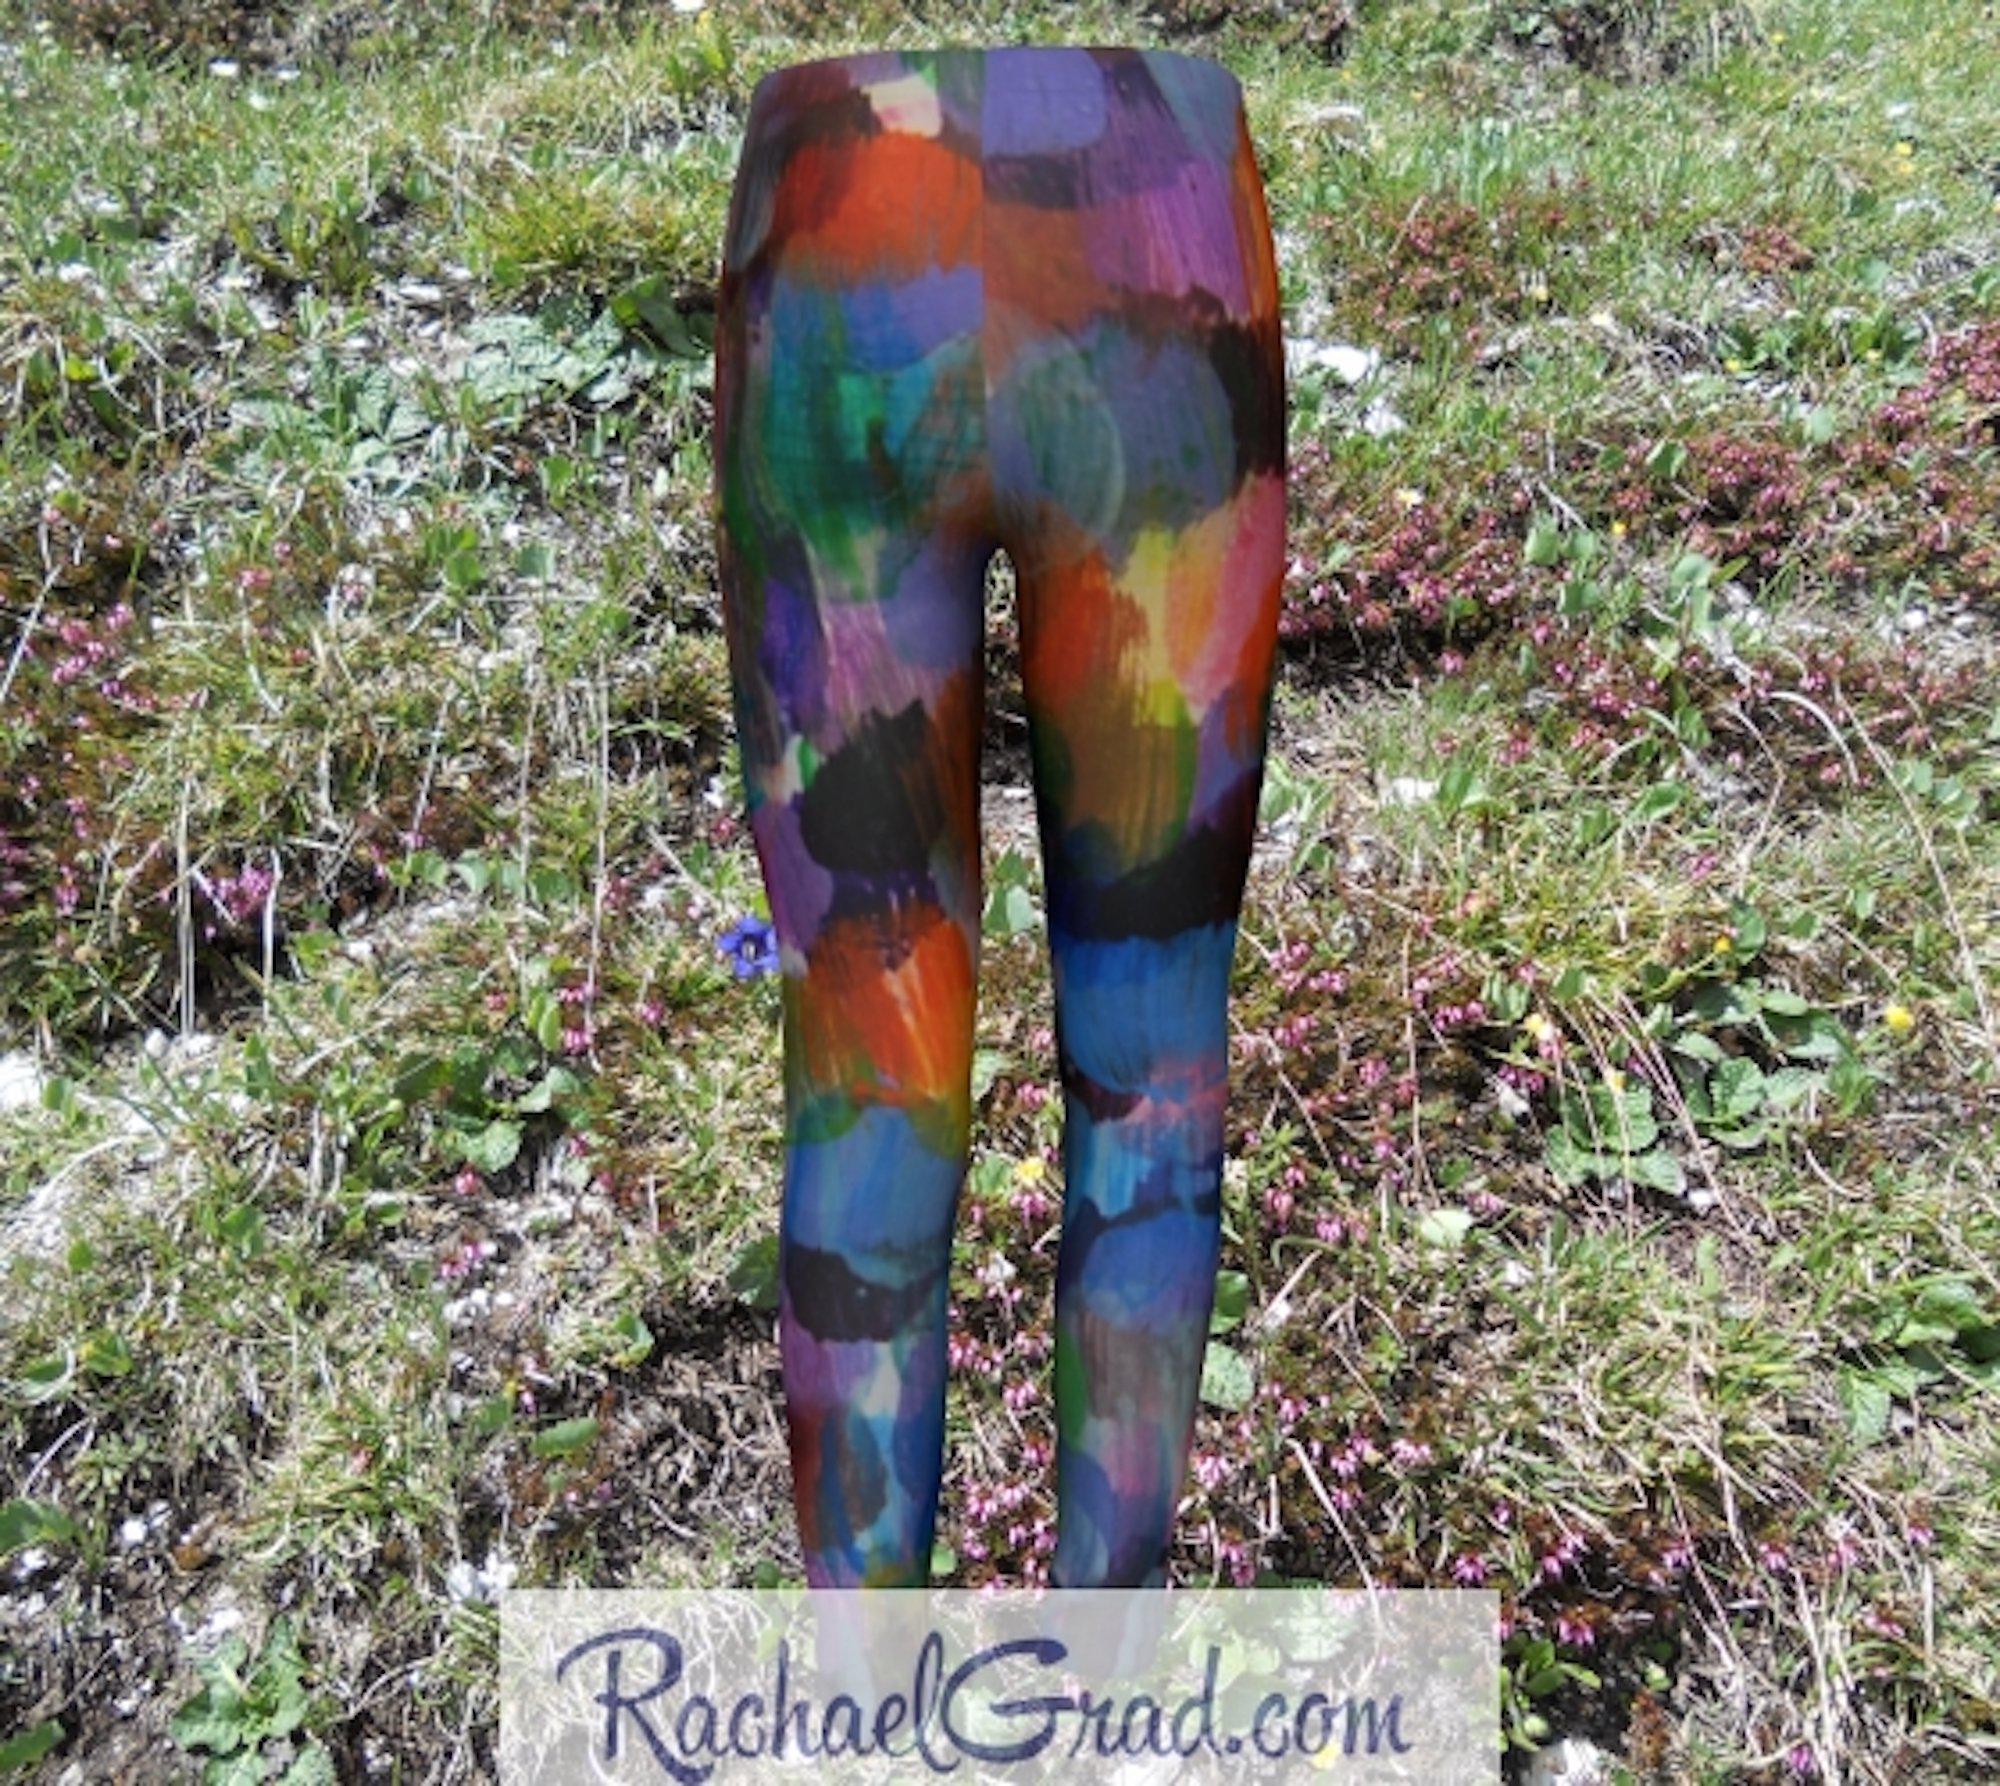 Official Quaranteen 13 Years Old Birthday Teenager Leggings for Sale by  Sinful Charm